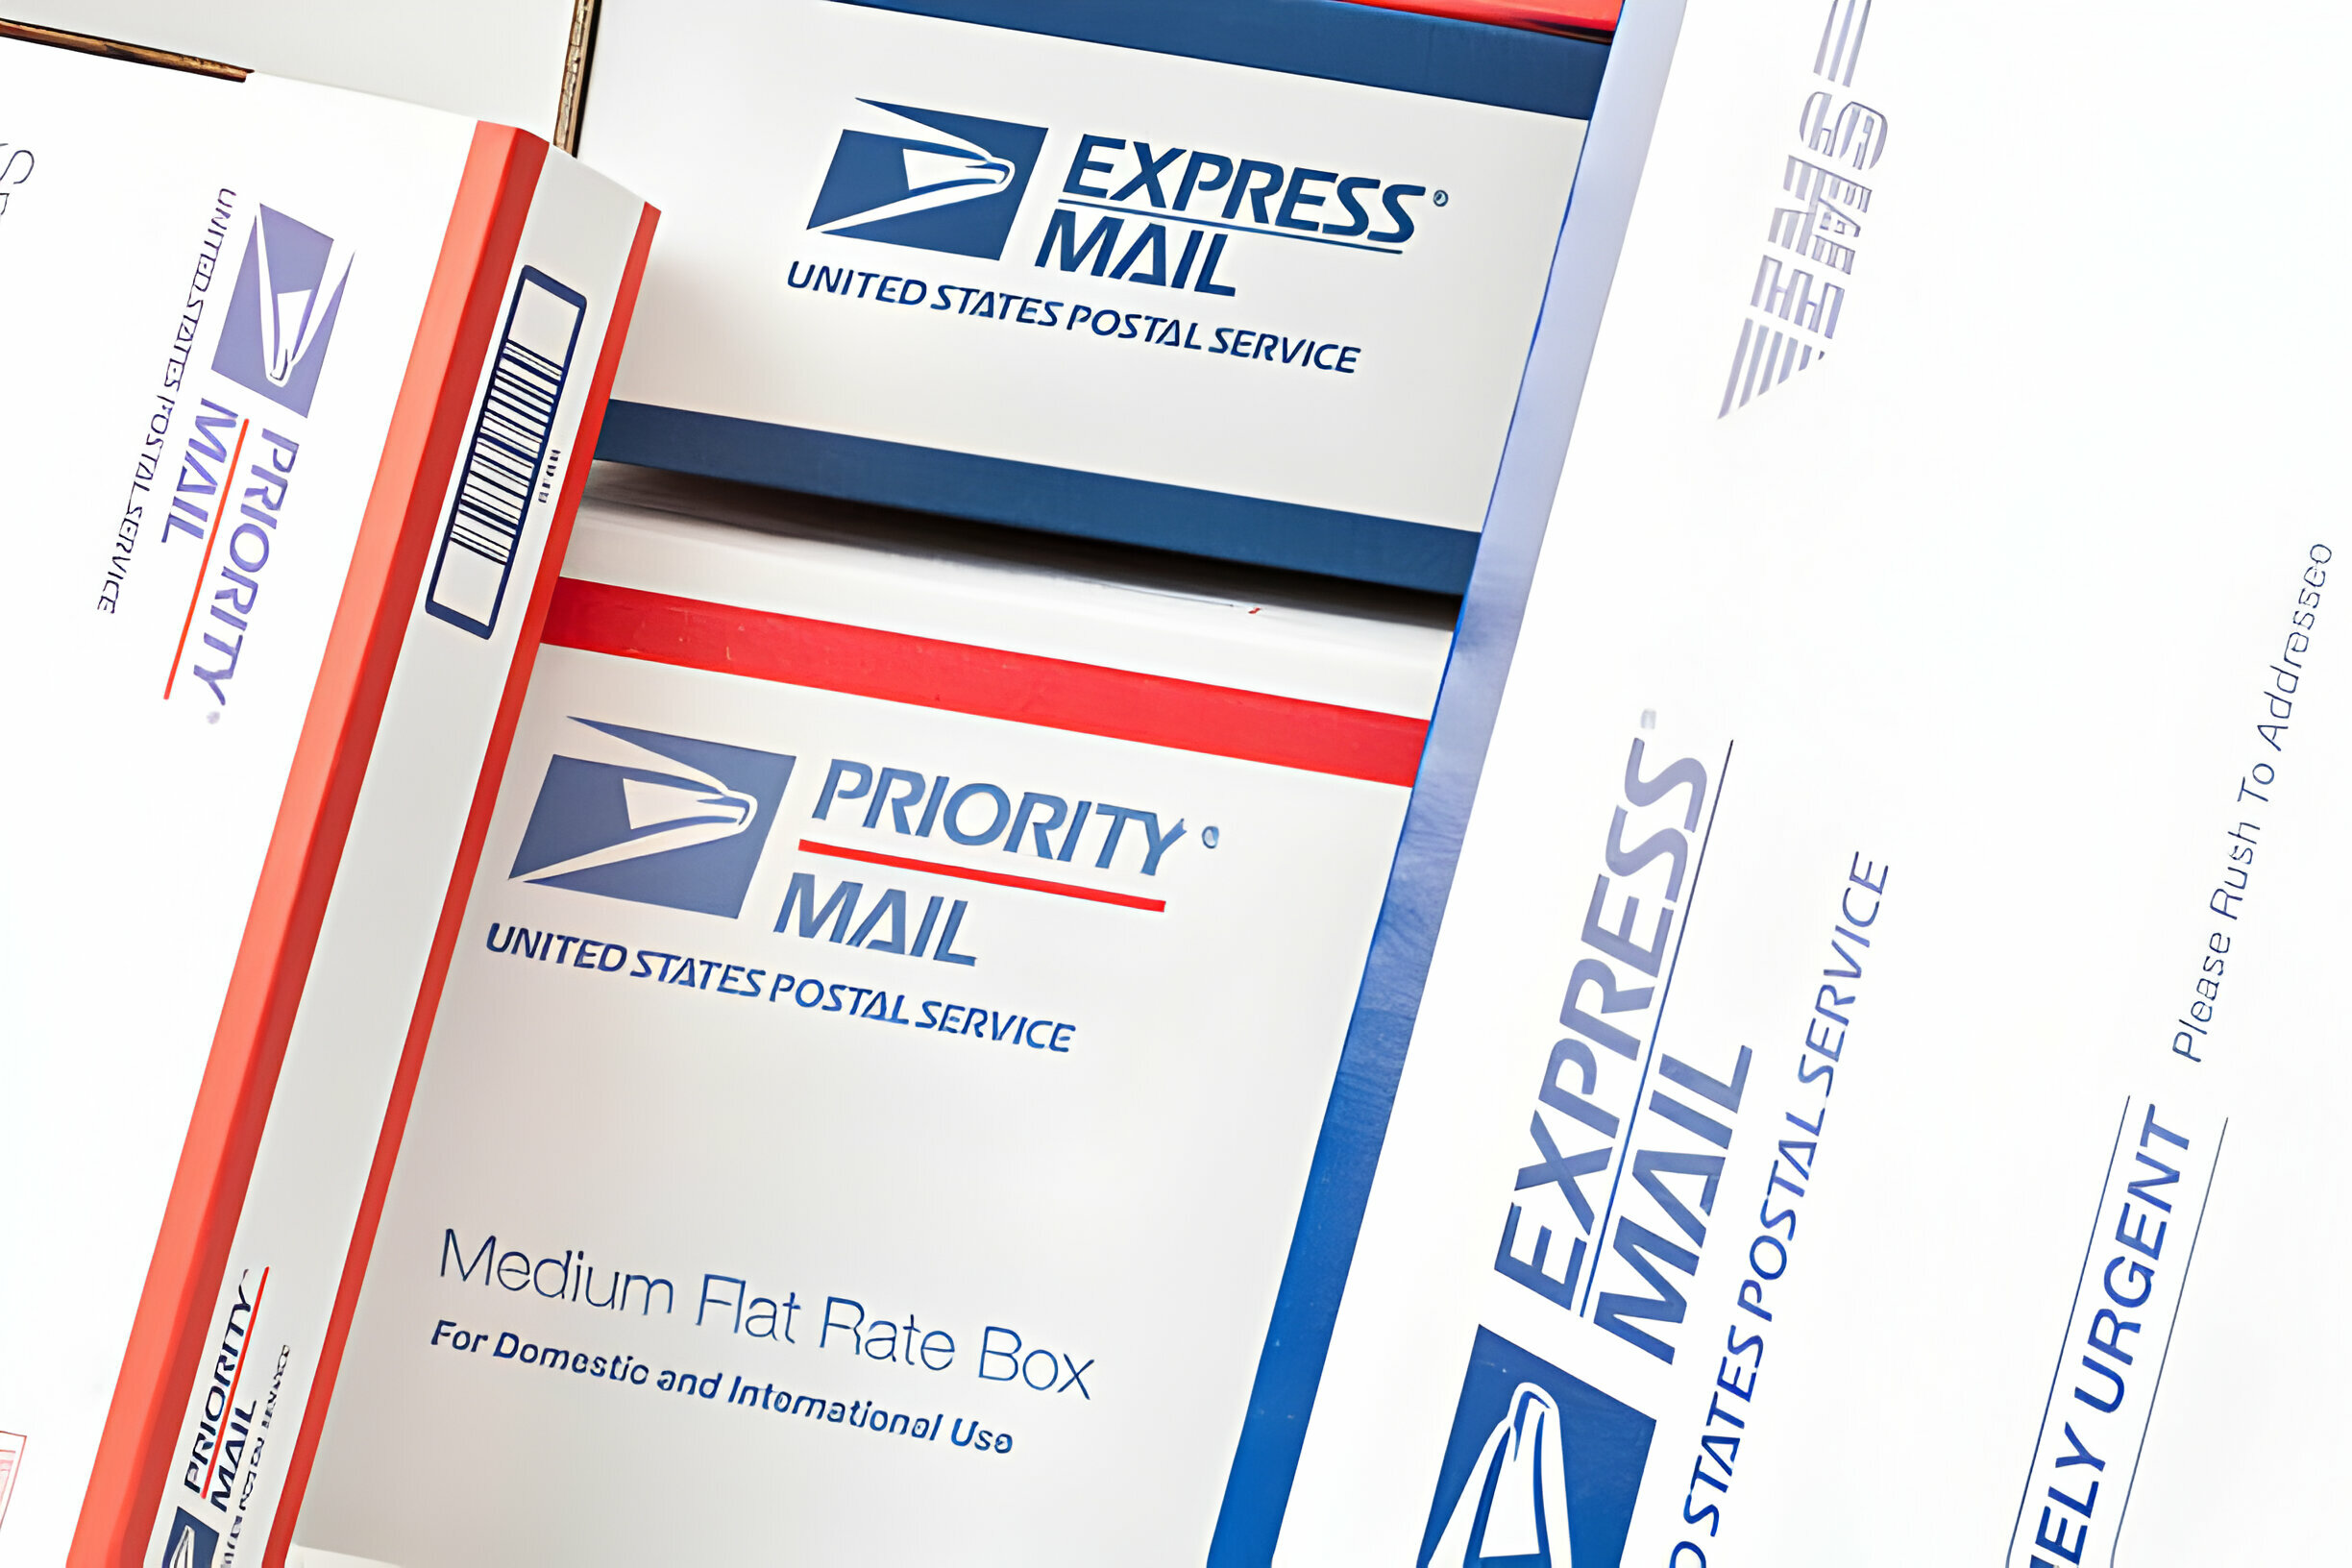 Shipping Label Created Usps Awaiting Item: Pasted